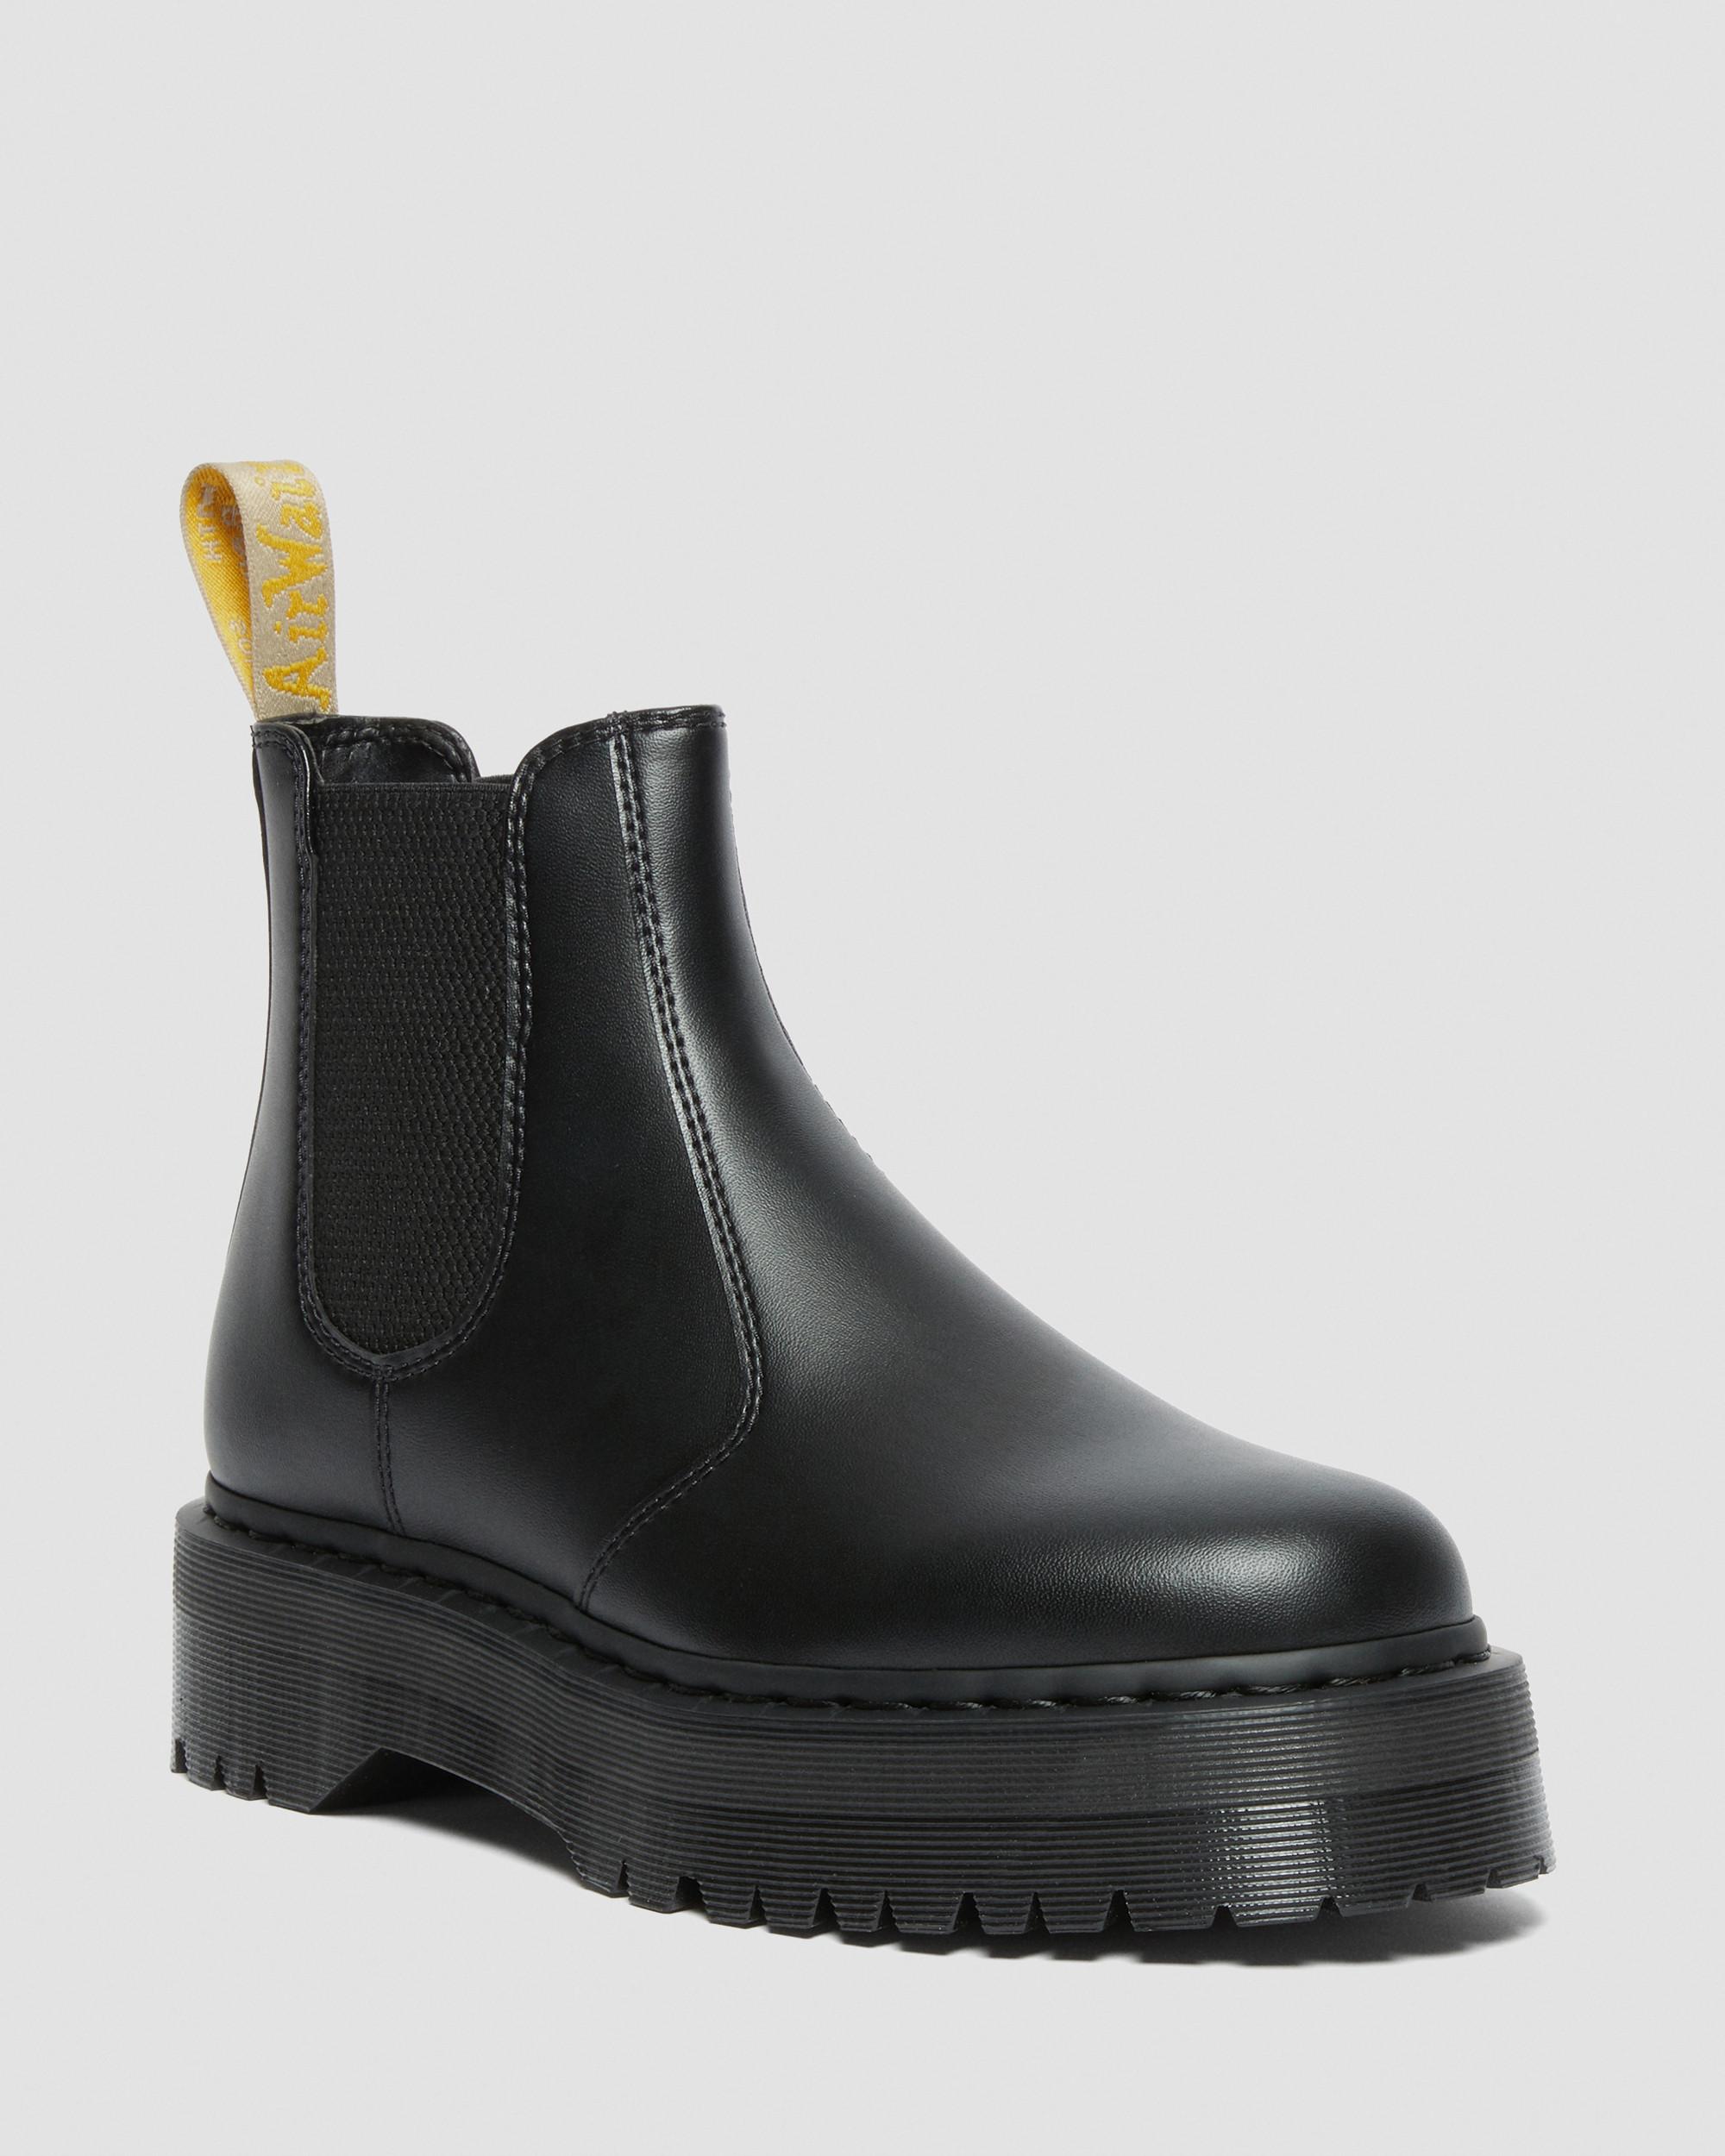 Hurston Women's Leather Heeled Chelsea Boots | Dr. Martens